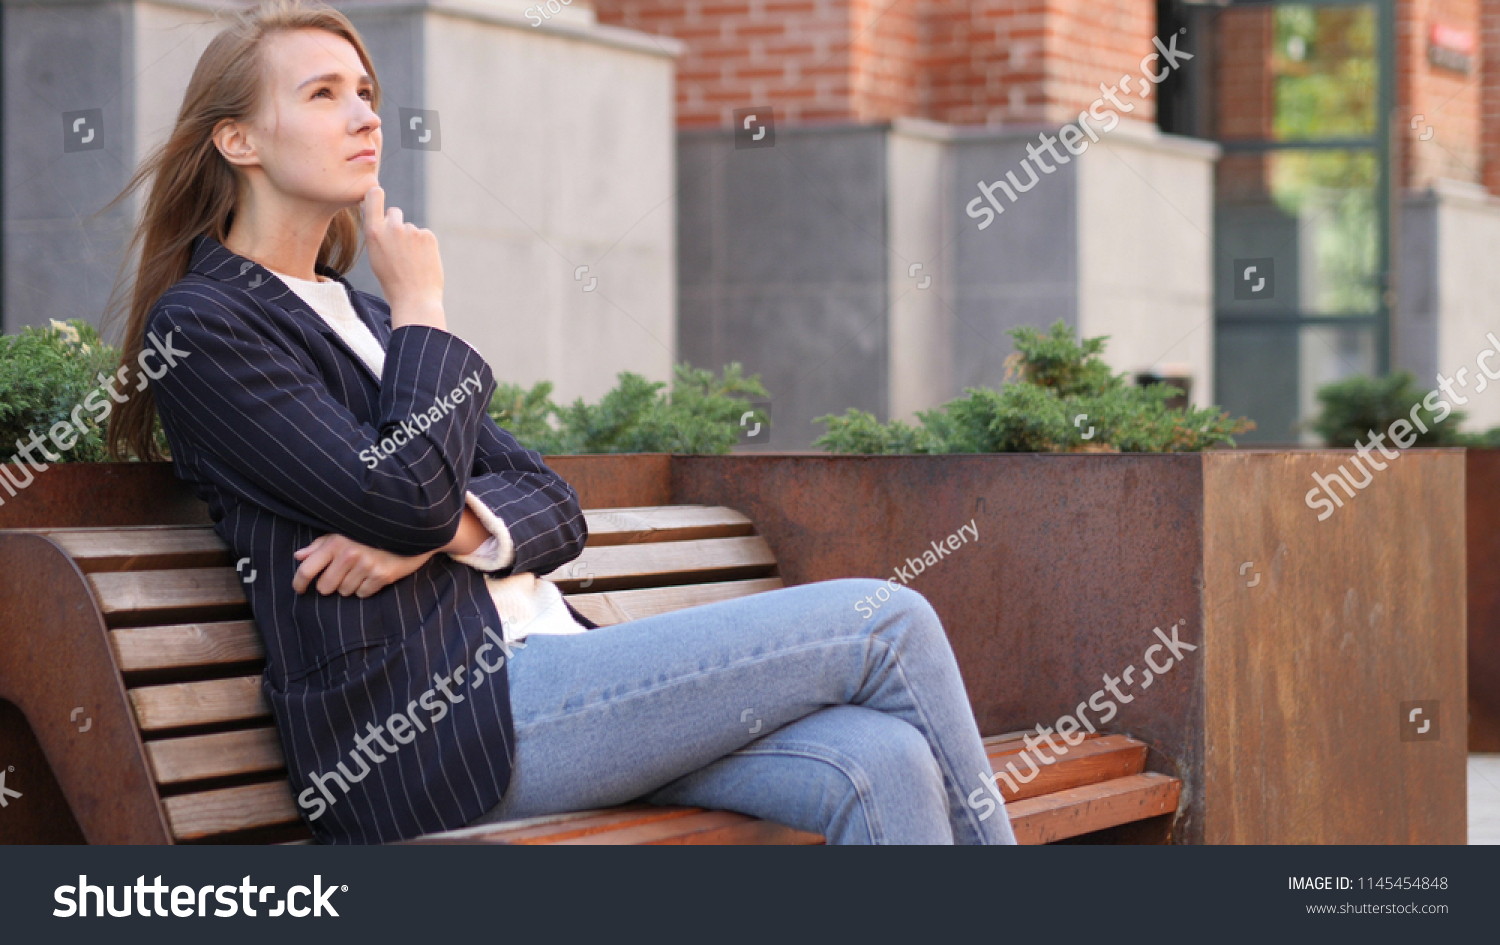 Pensive Business Woman Thinking while Sitting Outside Office on Bench #1145454848